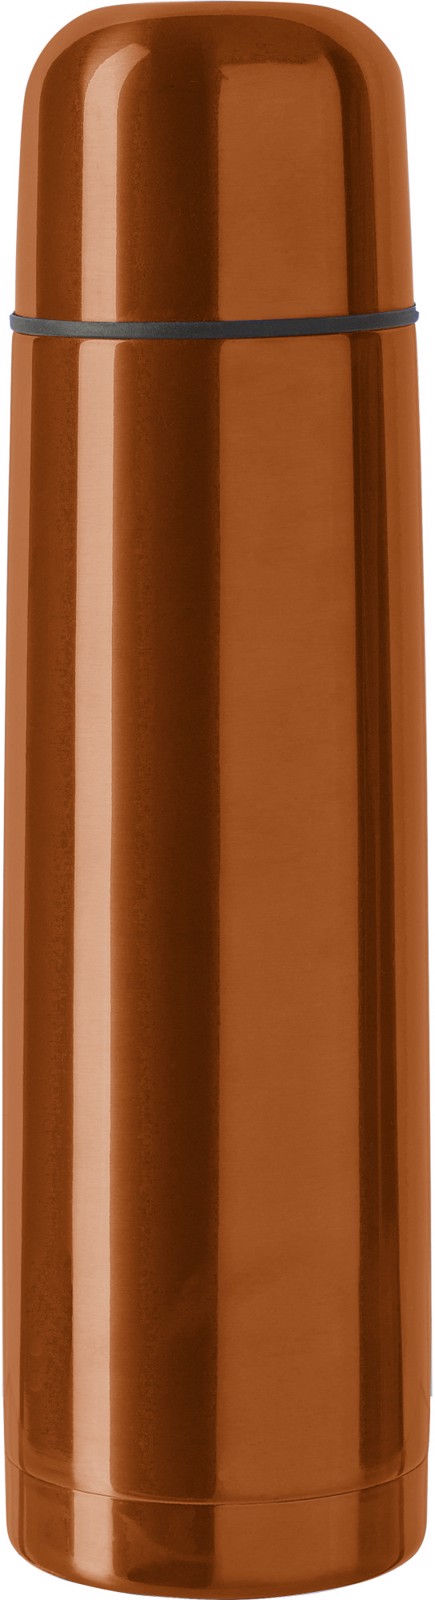 Stainless steel double walled flask - Orange